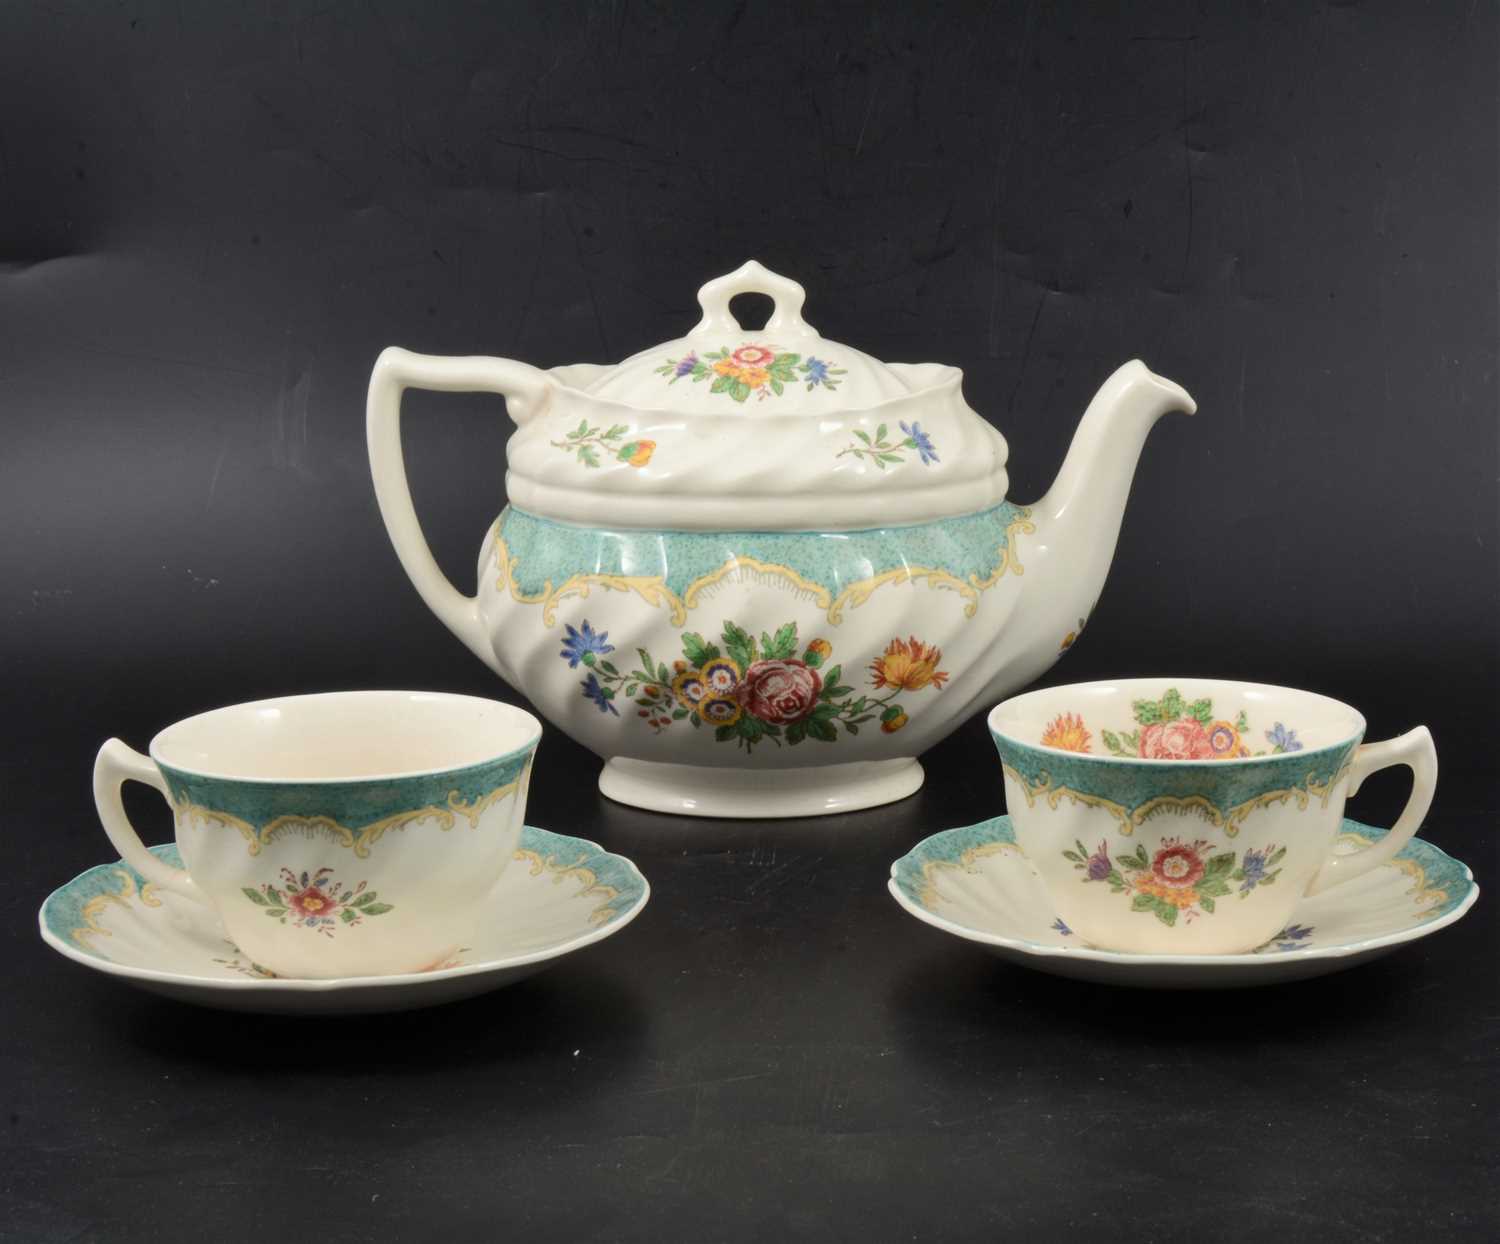 Lot 43 - Royal Doulton "Kingswood" part dinner and tea service.